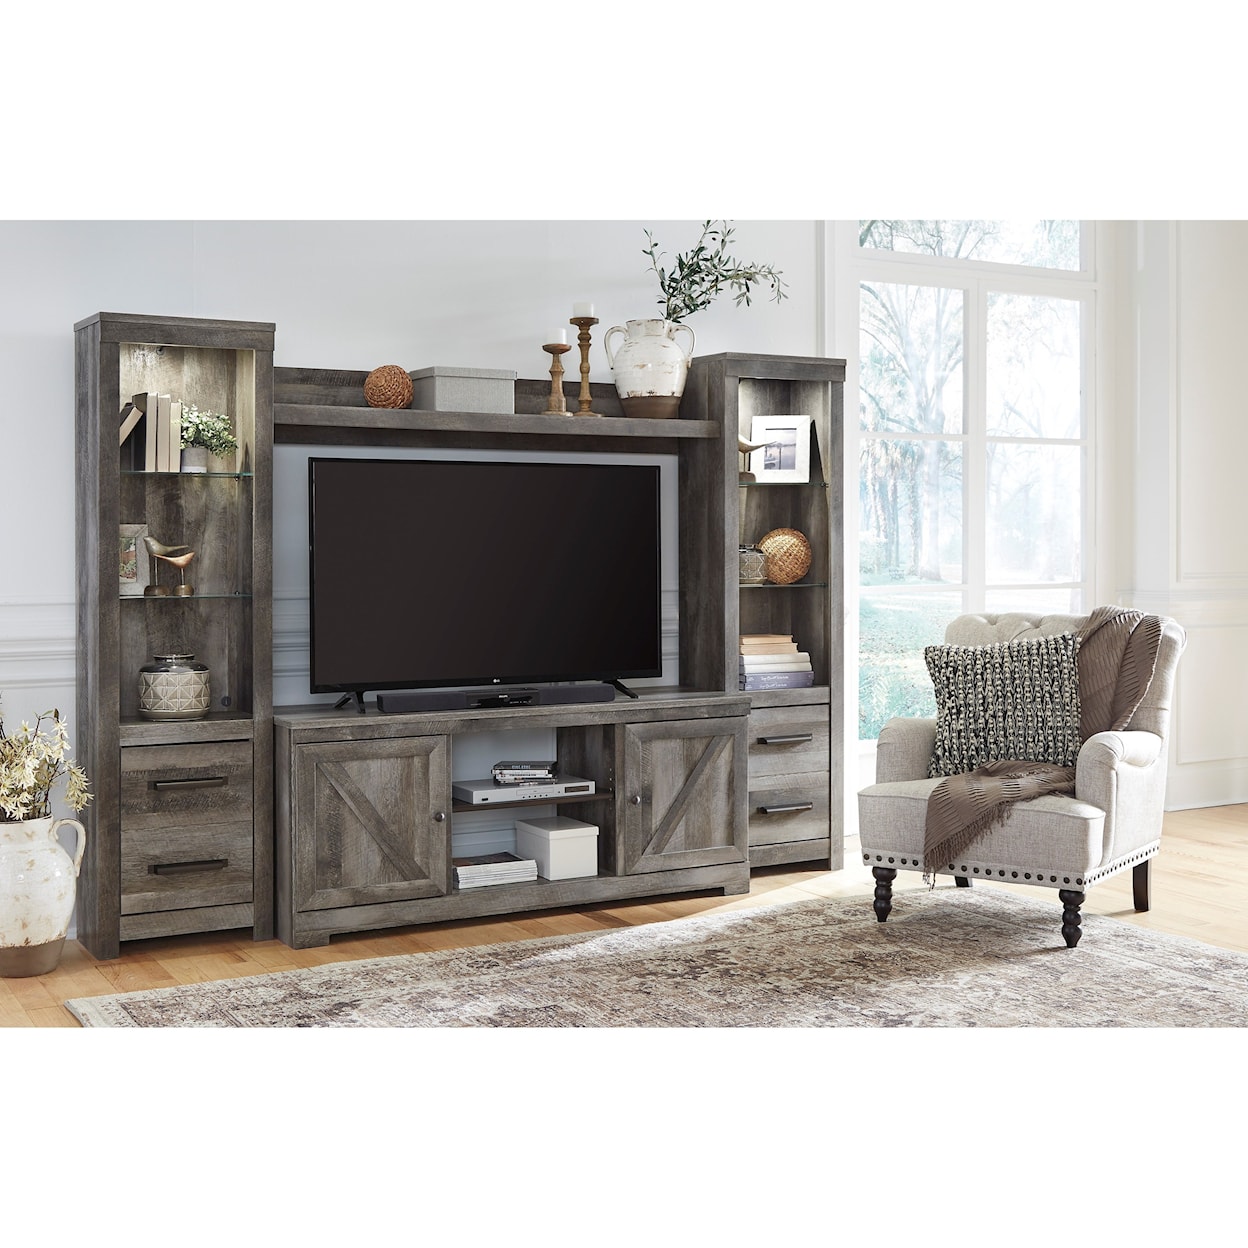 Signature Design by Ashley Wynnlow Entertainment Center